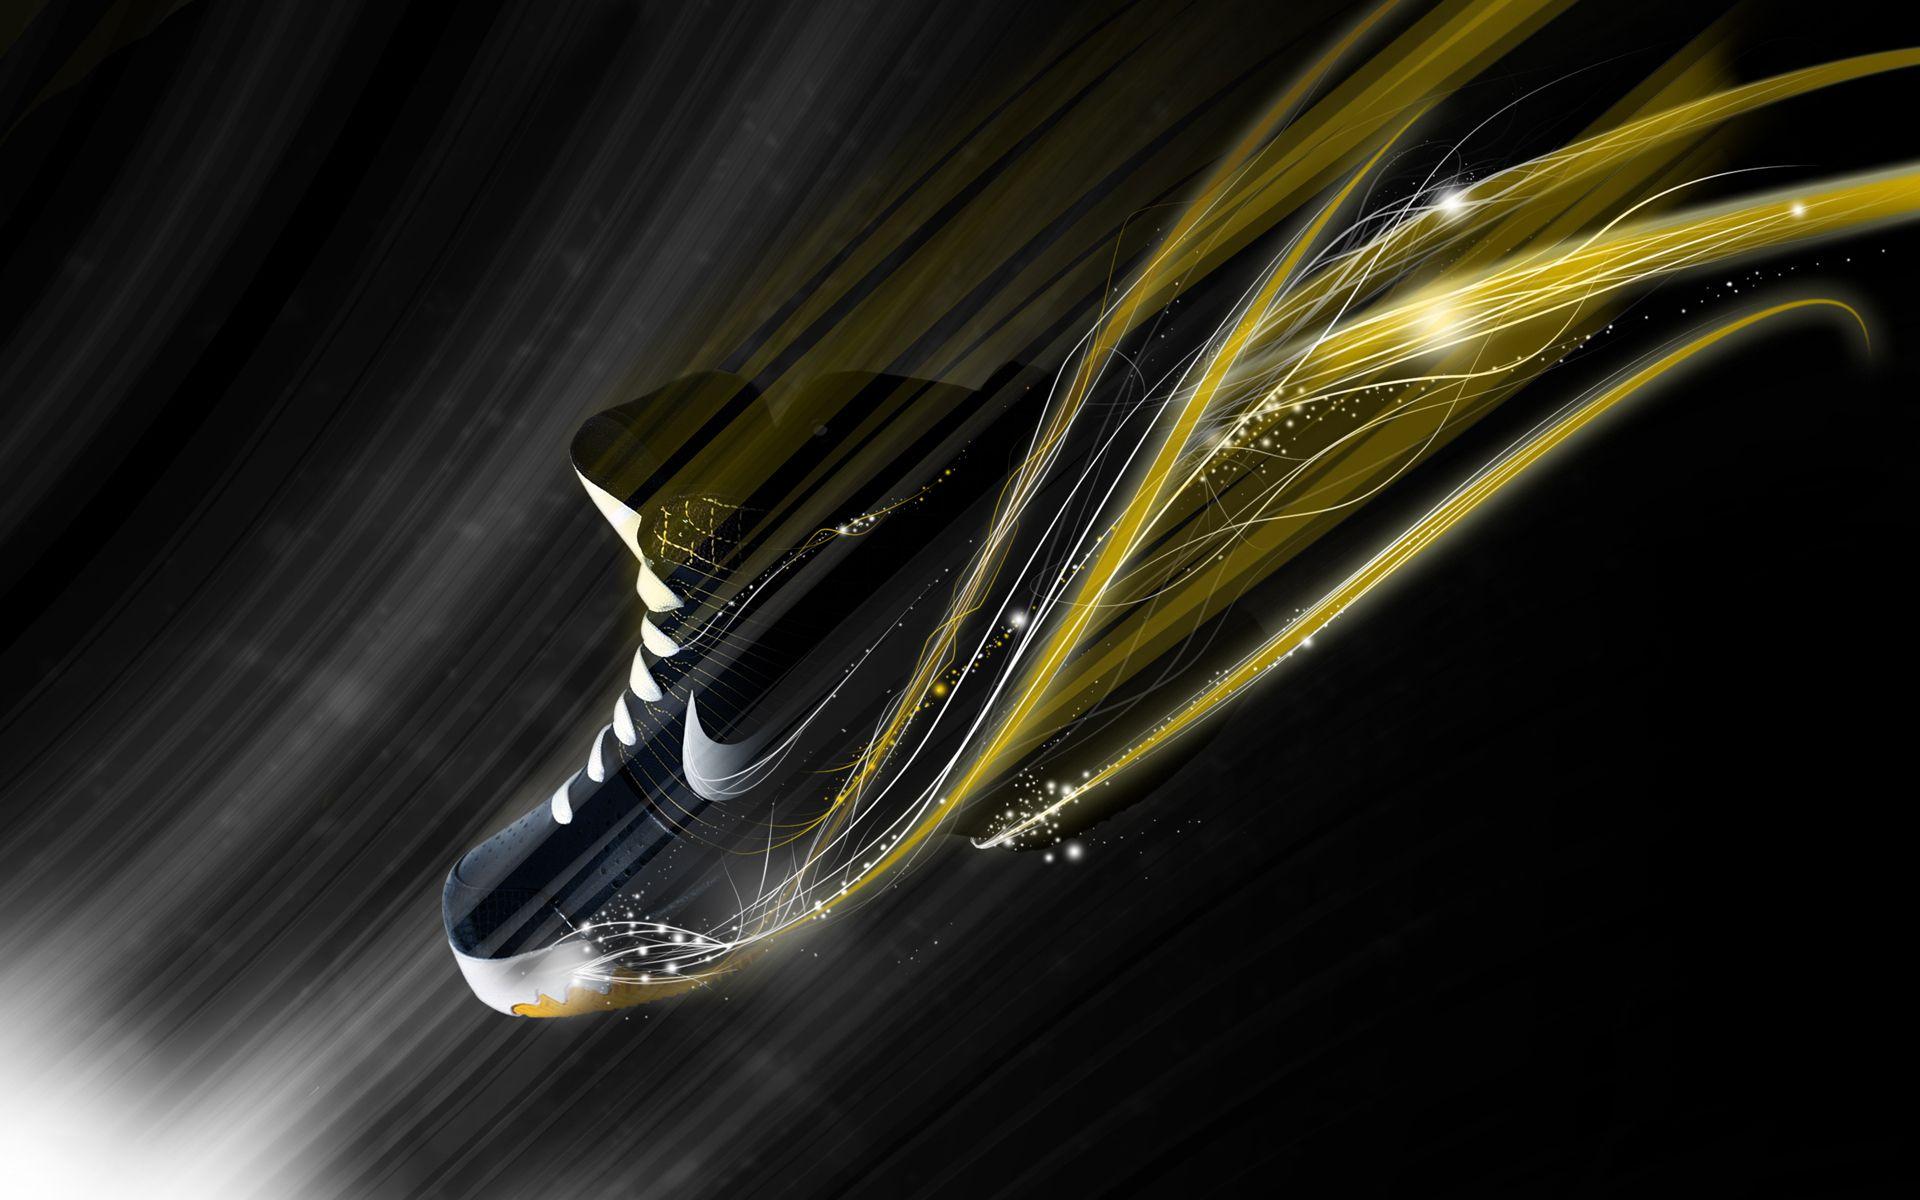 Nike. Kobe wallpaper and image, picture, photo